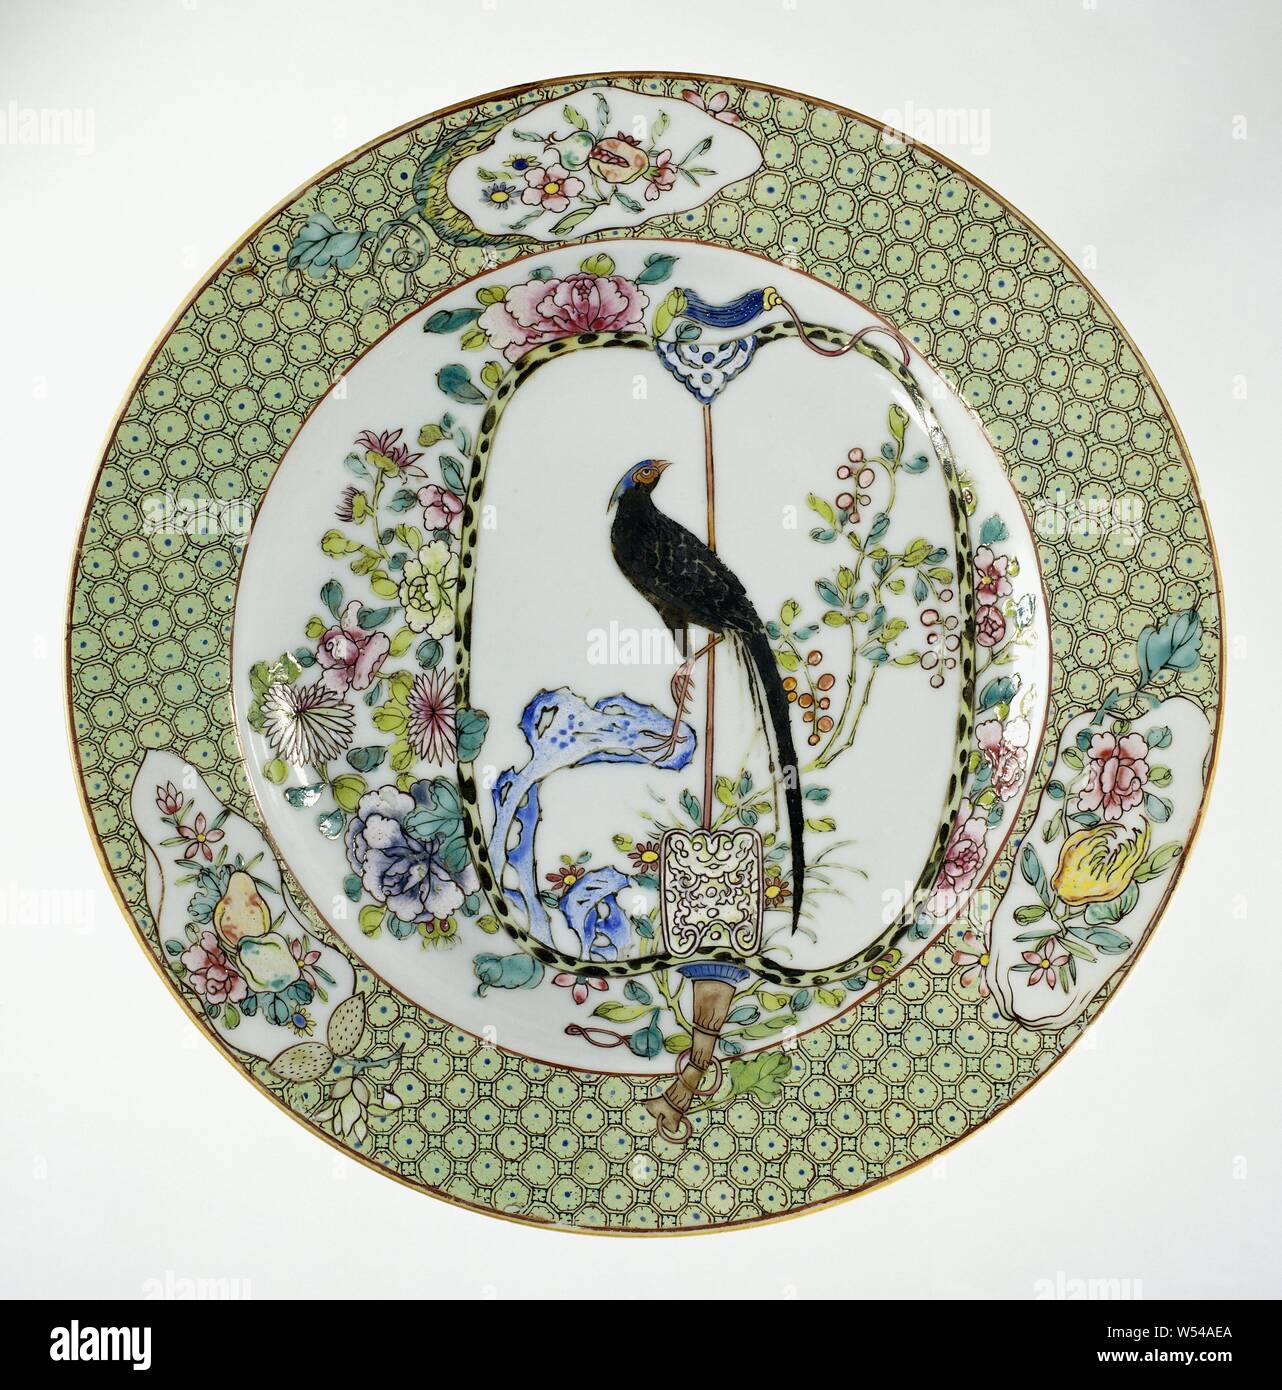 Plate with a fan decorated with a pheasant, Porcelain plate, painted on the glaze in blue, red, pink, green, yellow, black and silver. On the shelf a fan whose handle extends to the wall and edge, on the fan a pheasant on a rock with flowering plants is depicted, around the range of peony and chrysanthemum branches, on the edge napkin work interspersed with three cartouches in the form of fruits with fruit branches. Two cracks in the edge. Famille rose., anonymous, China, c. 1730 - c. 1745, Qing-dynasty (1644-1912) / Yongzheng-period (1723-1735) / Qianlong-period (1736-1795), porcelain Stock Photo